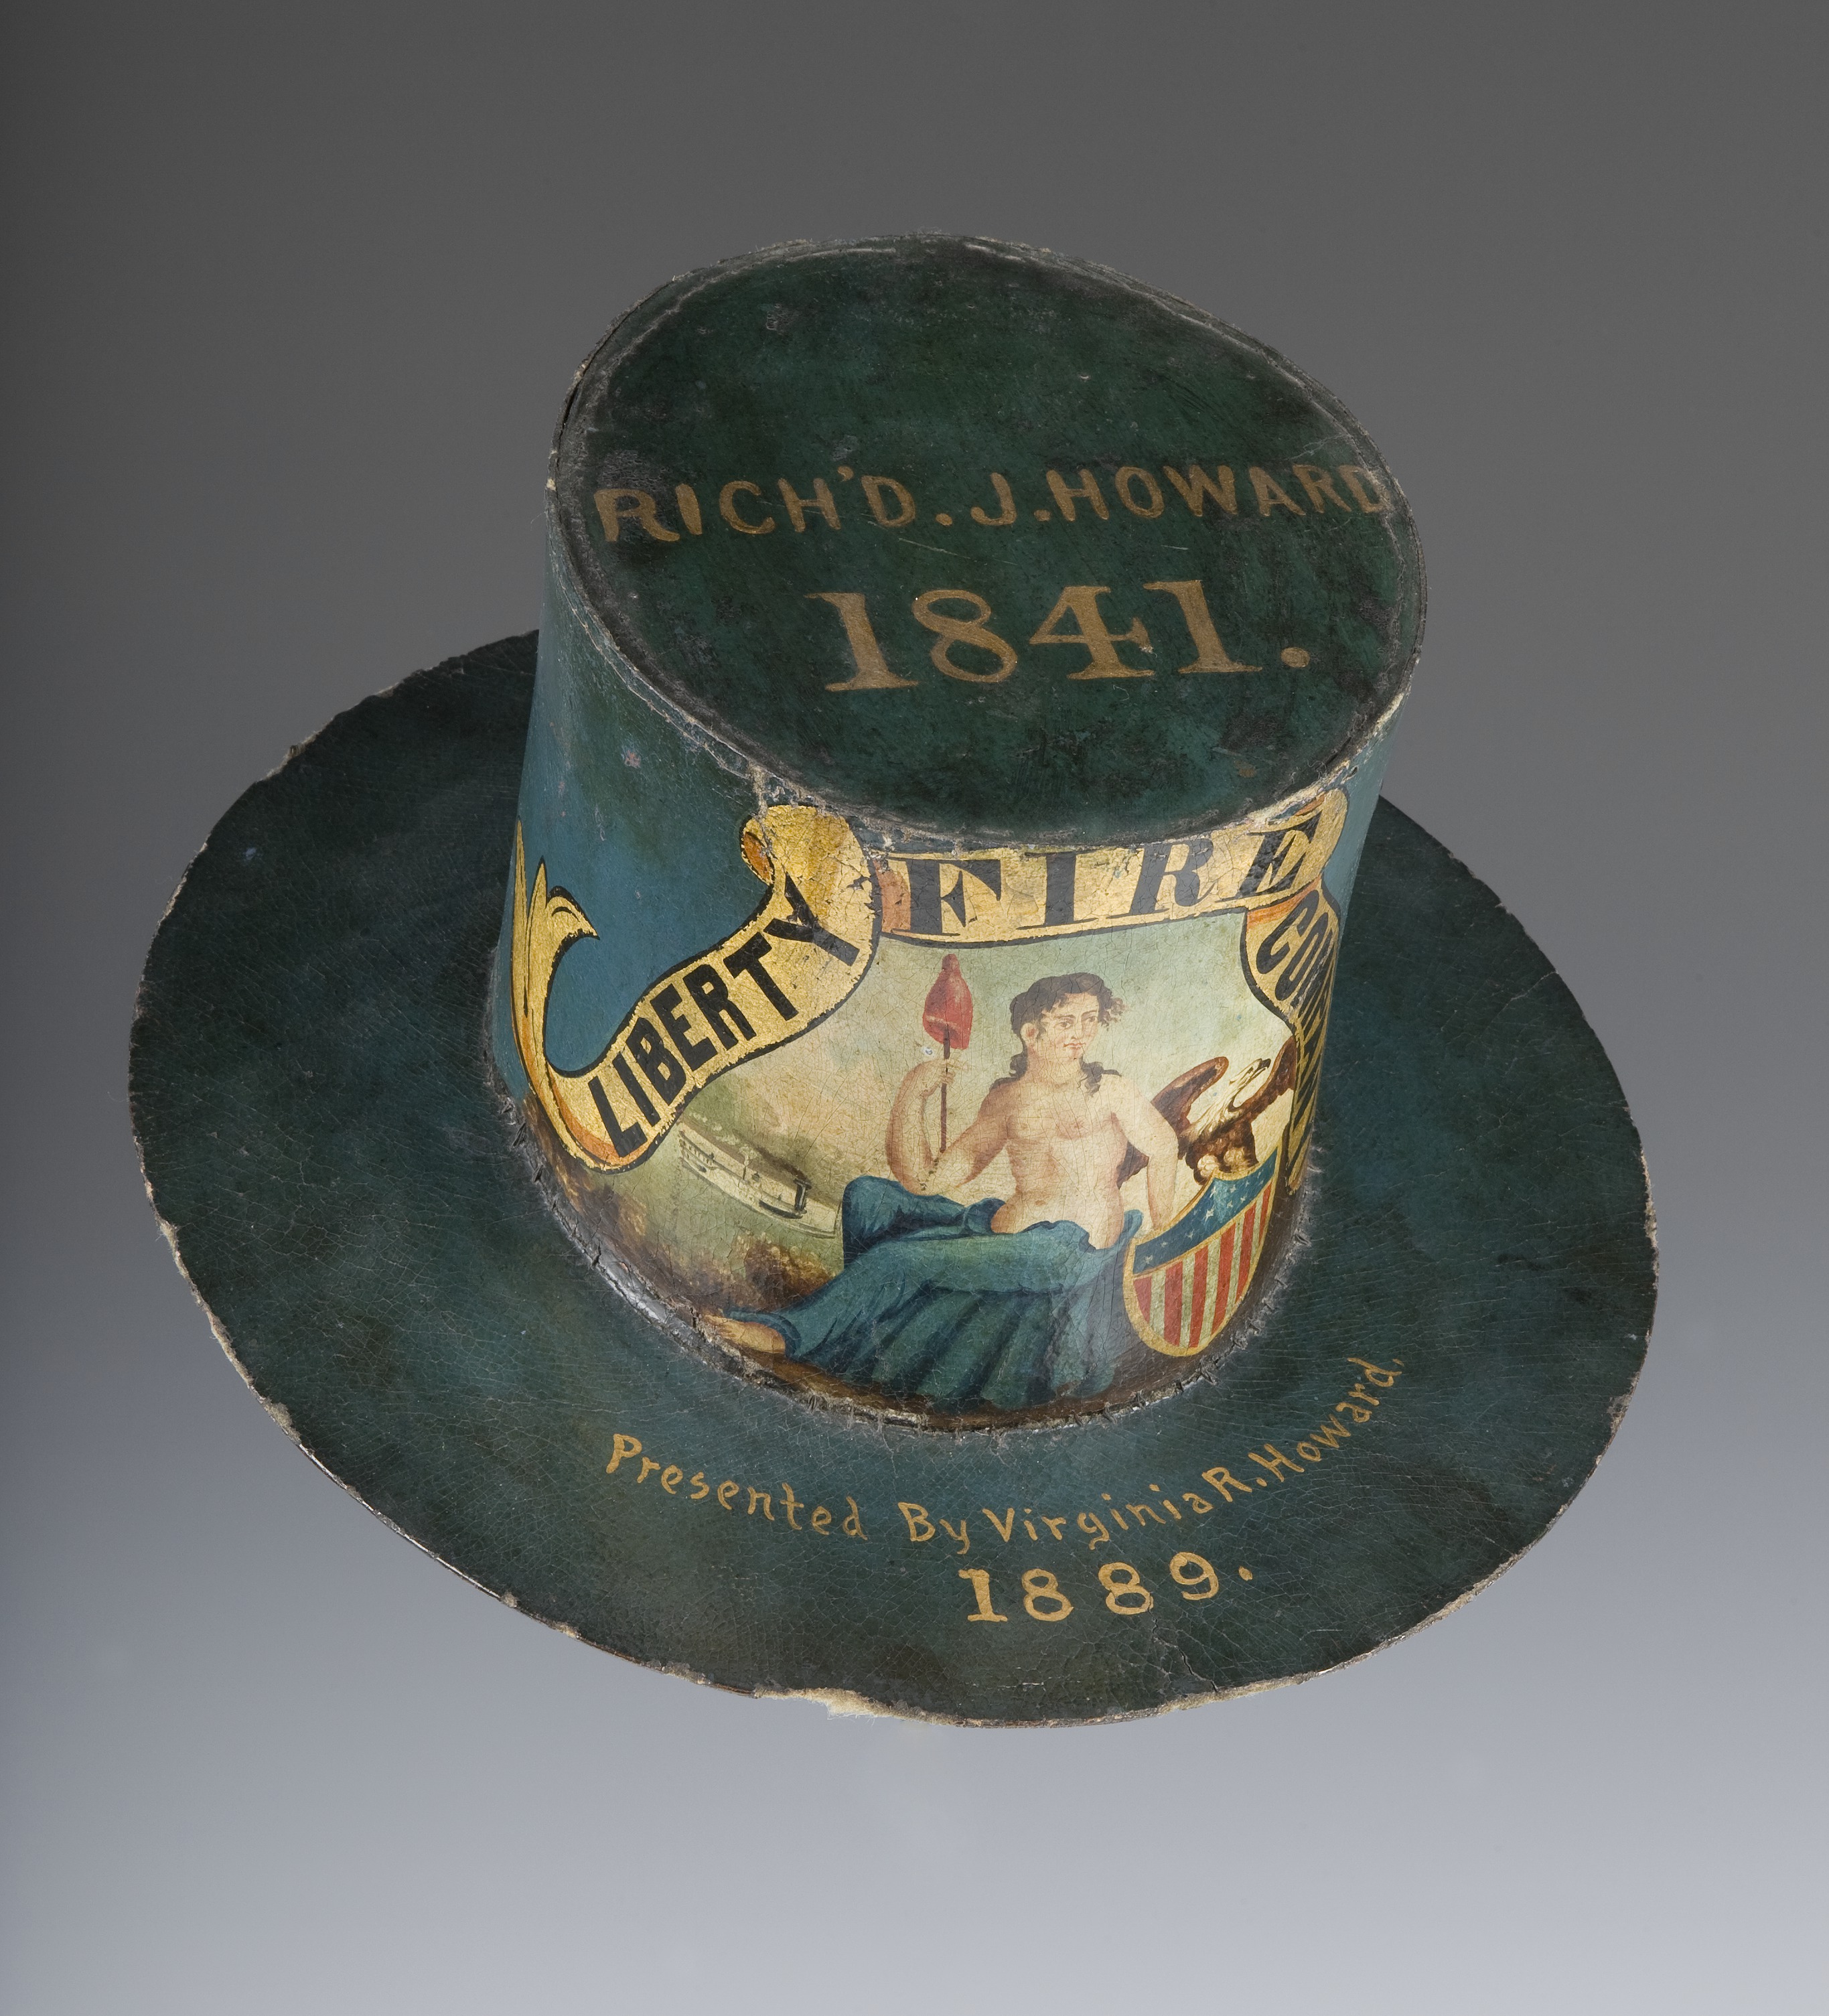 Historical Artifacts - cap - Rich'D.J.Howard 1841. Liberty in Presented By Virginis R.Howard 1889.